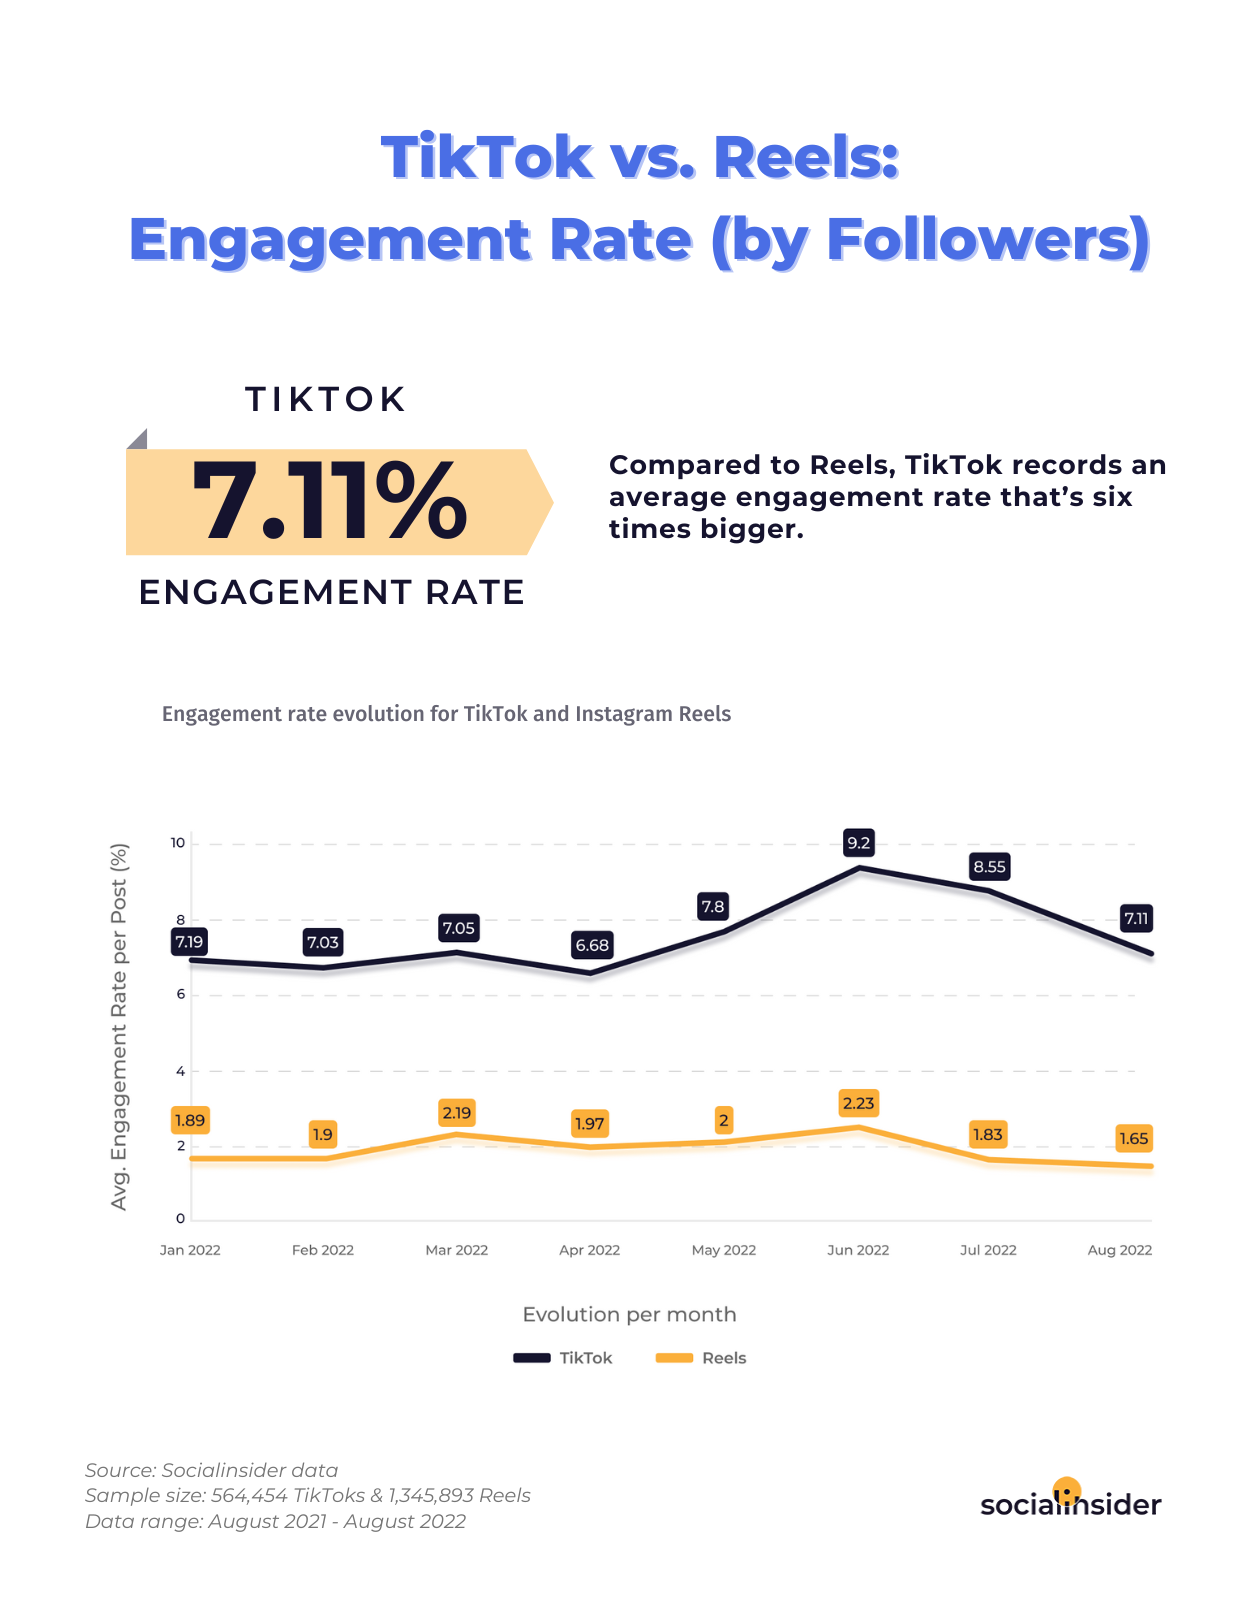 A chart with tiktok vs reels engagement rate by followers